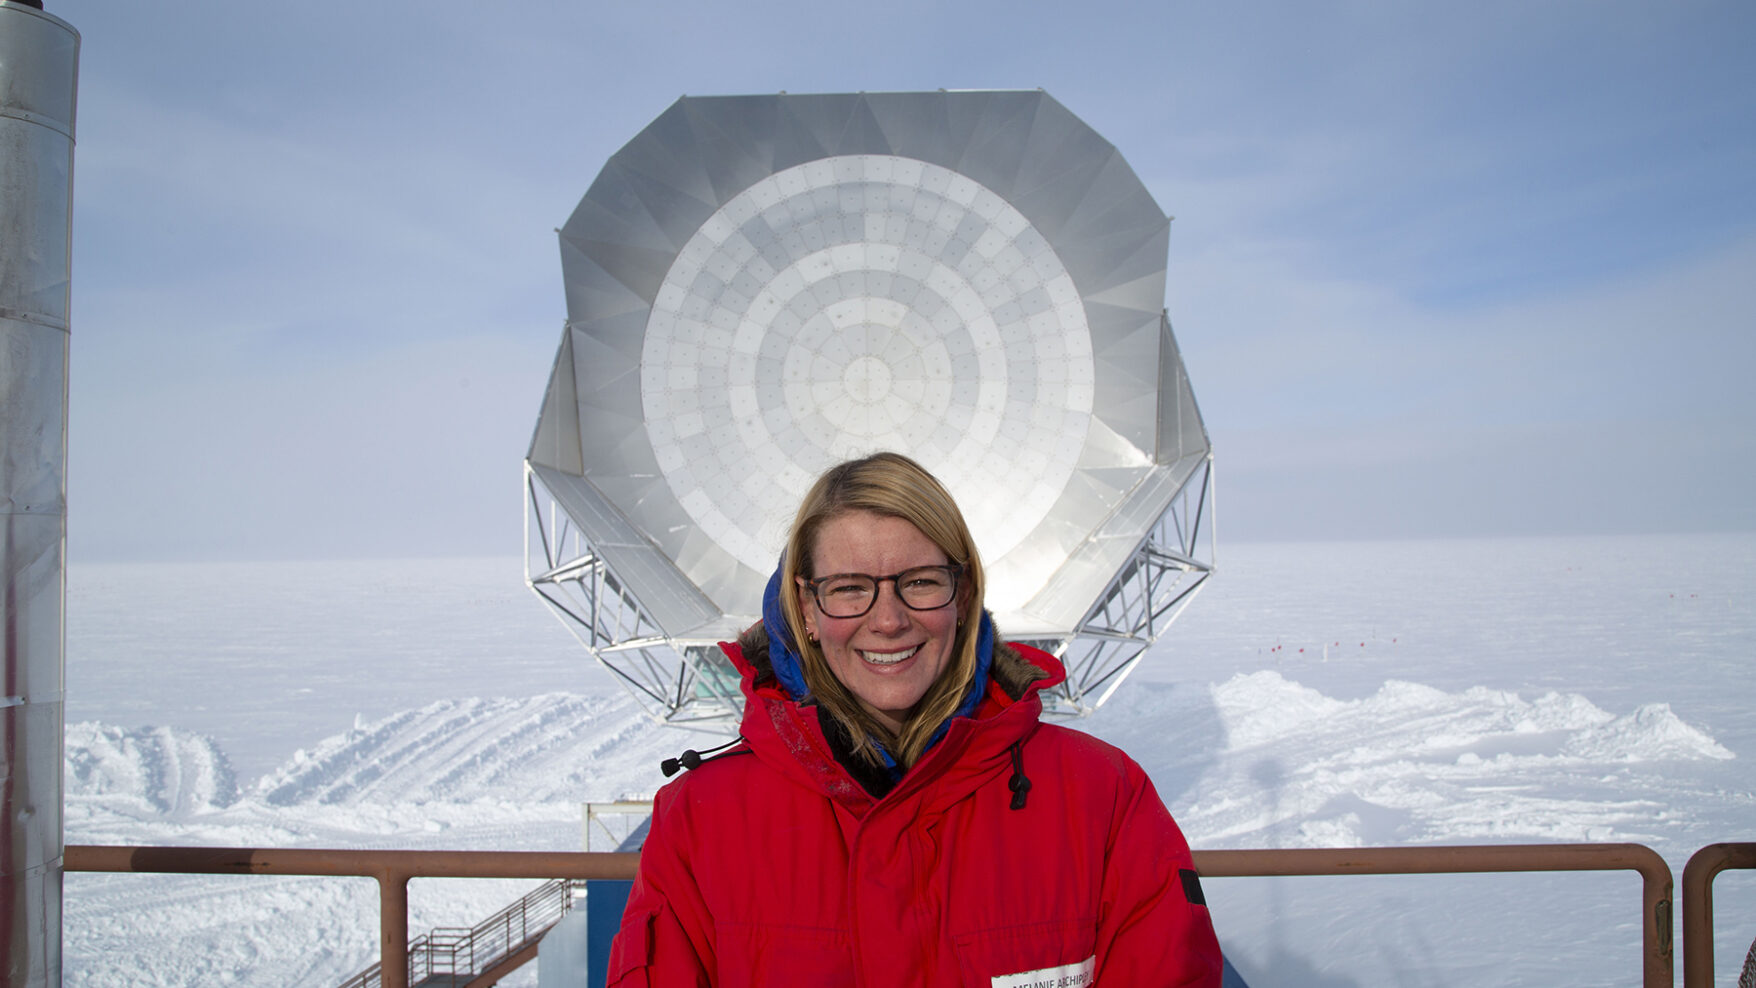 A white woman with blond hair, glasses, and a red coat is standing in front of a large white disc. In the background is a vast landscape of snow and ice, and blue sky.